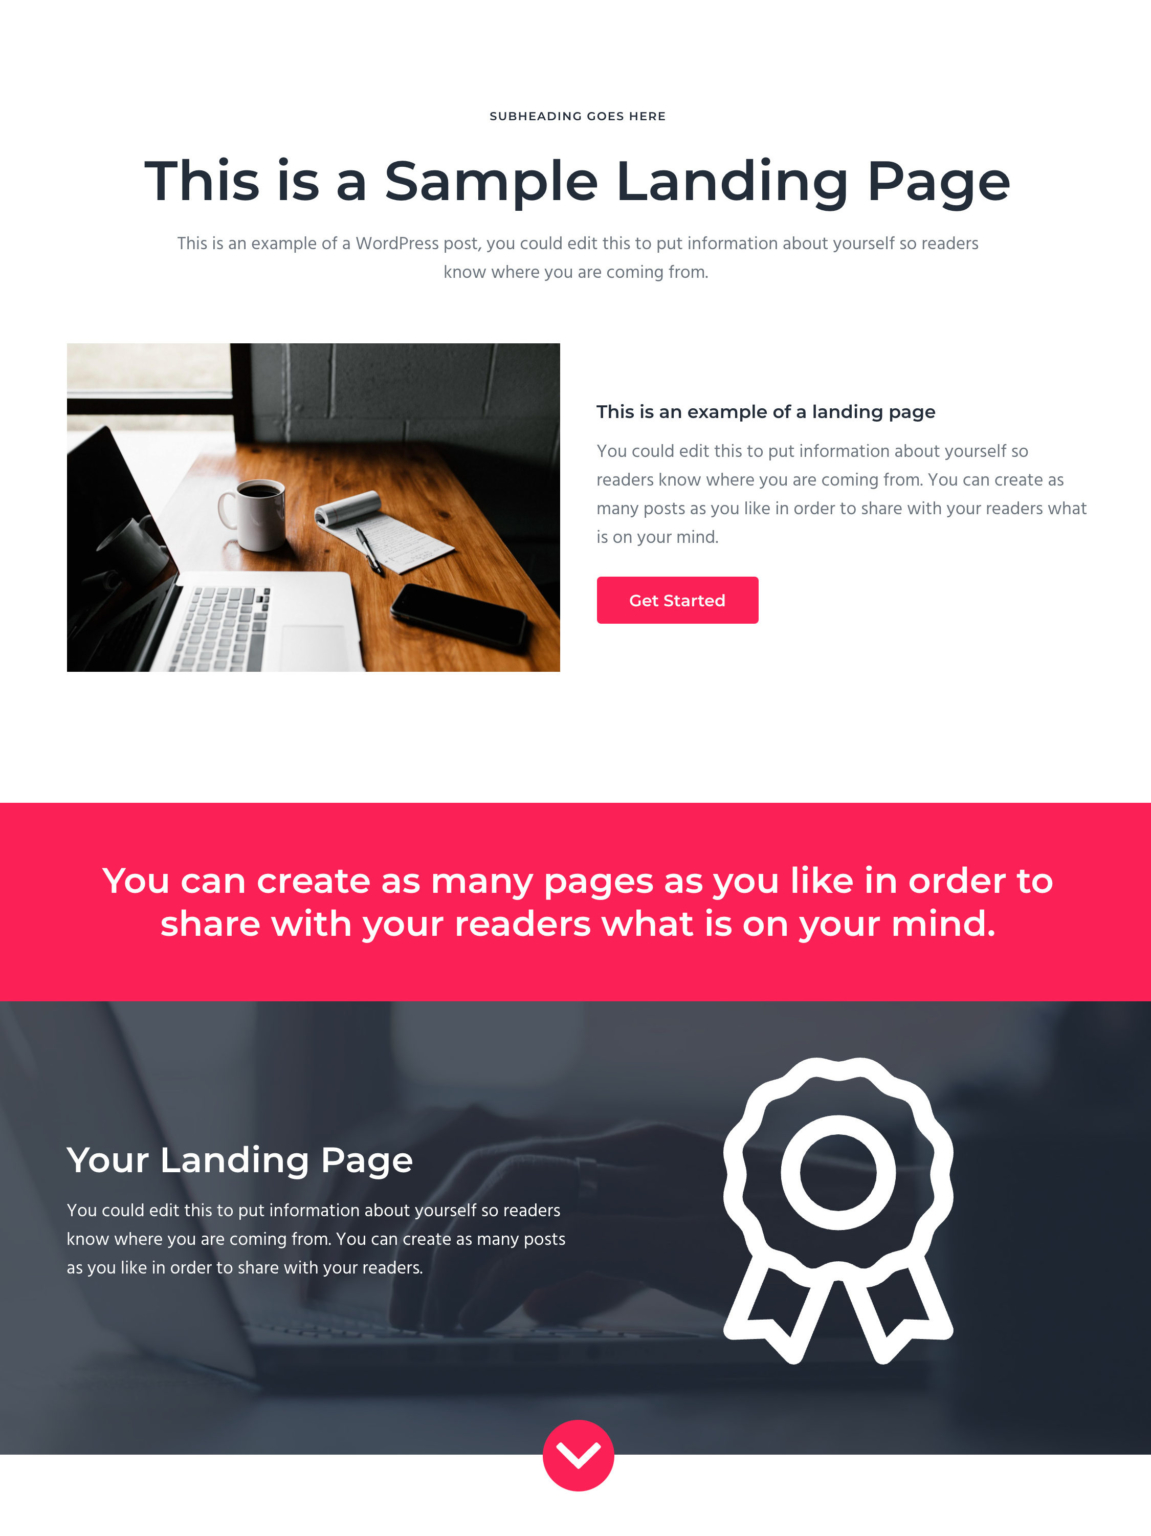 Product landing page layout